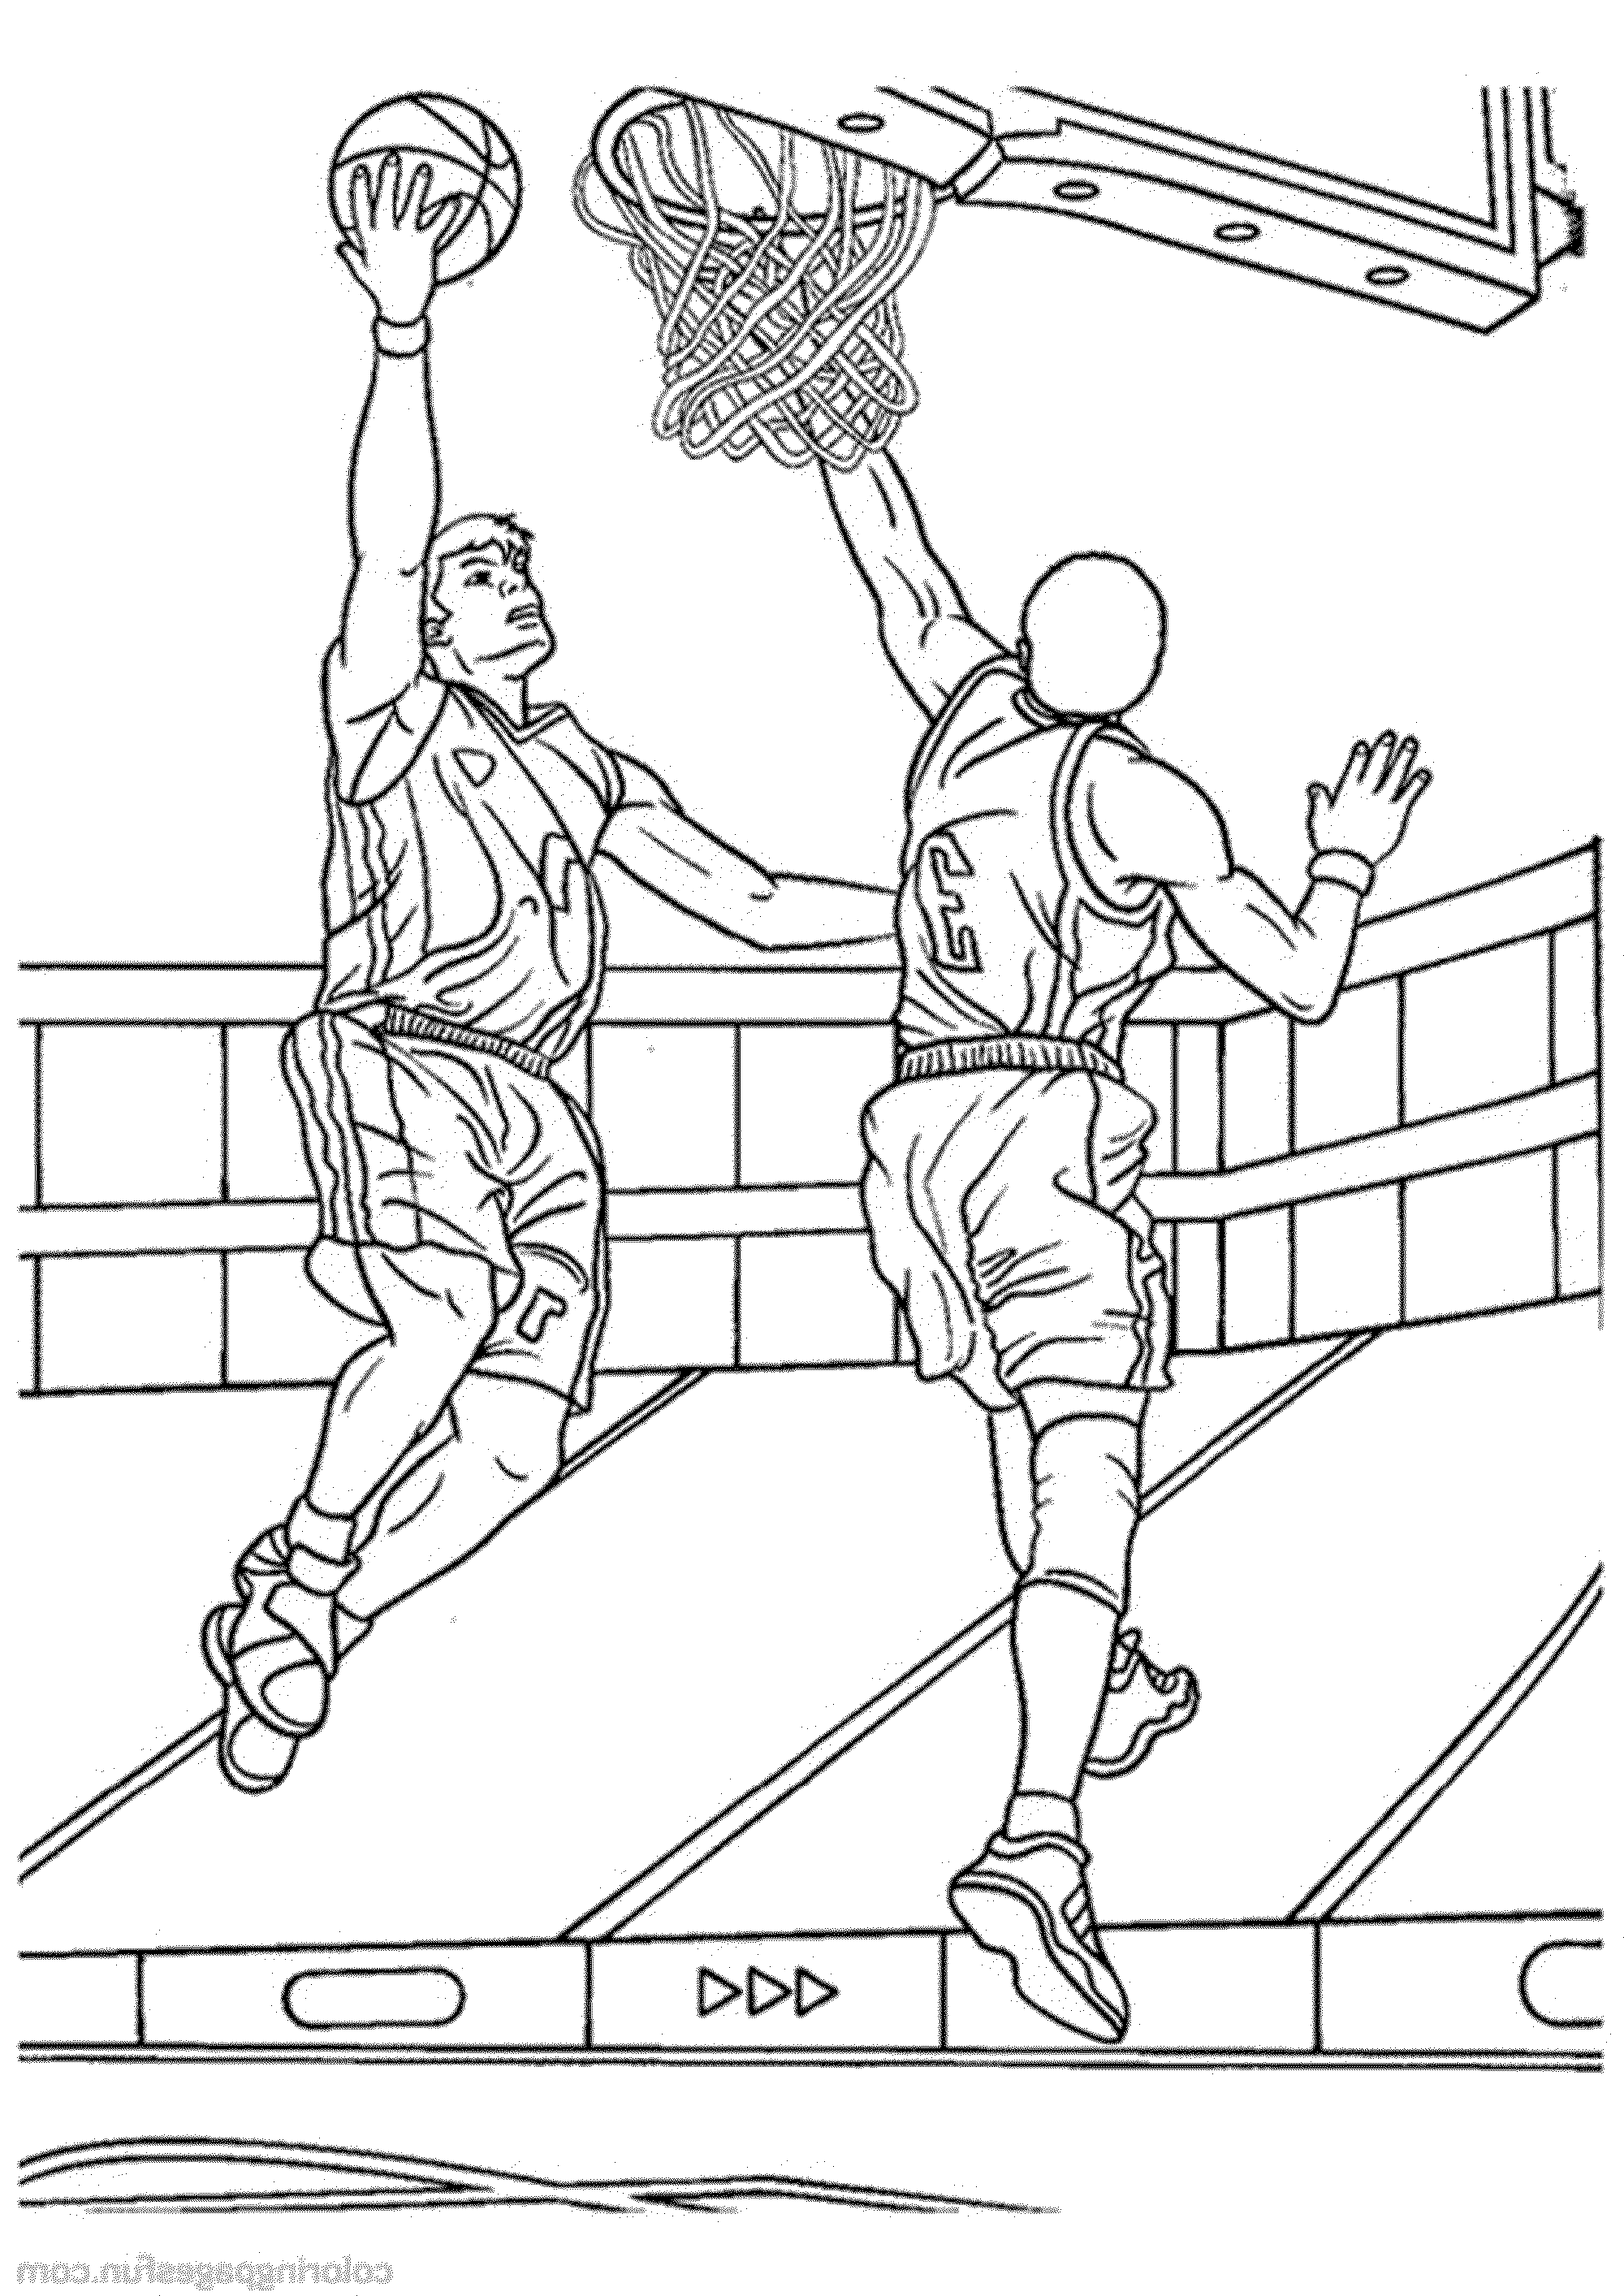 printable basketball coloring pages - Printable Kids Colouring Pages